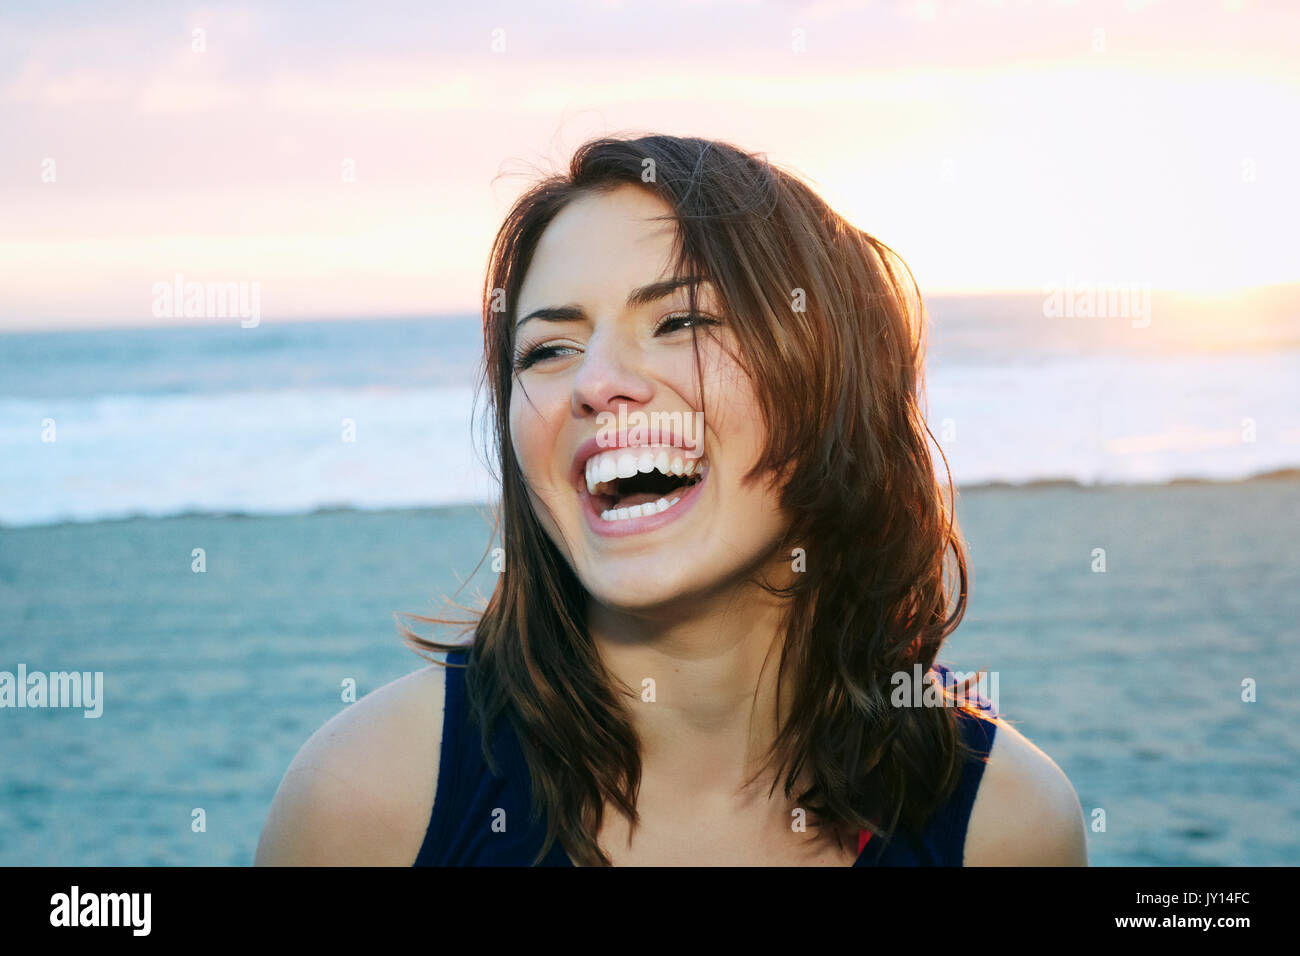 Portrait of laughing Caucasian woman at beach Stock Photo